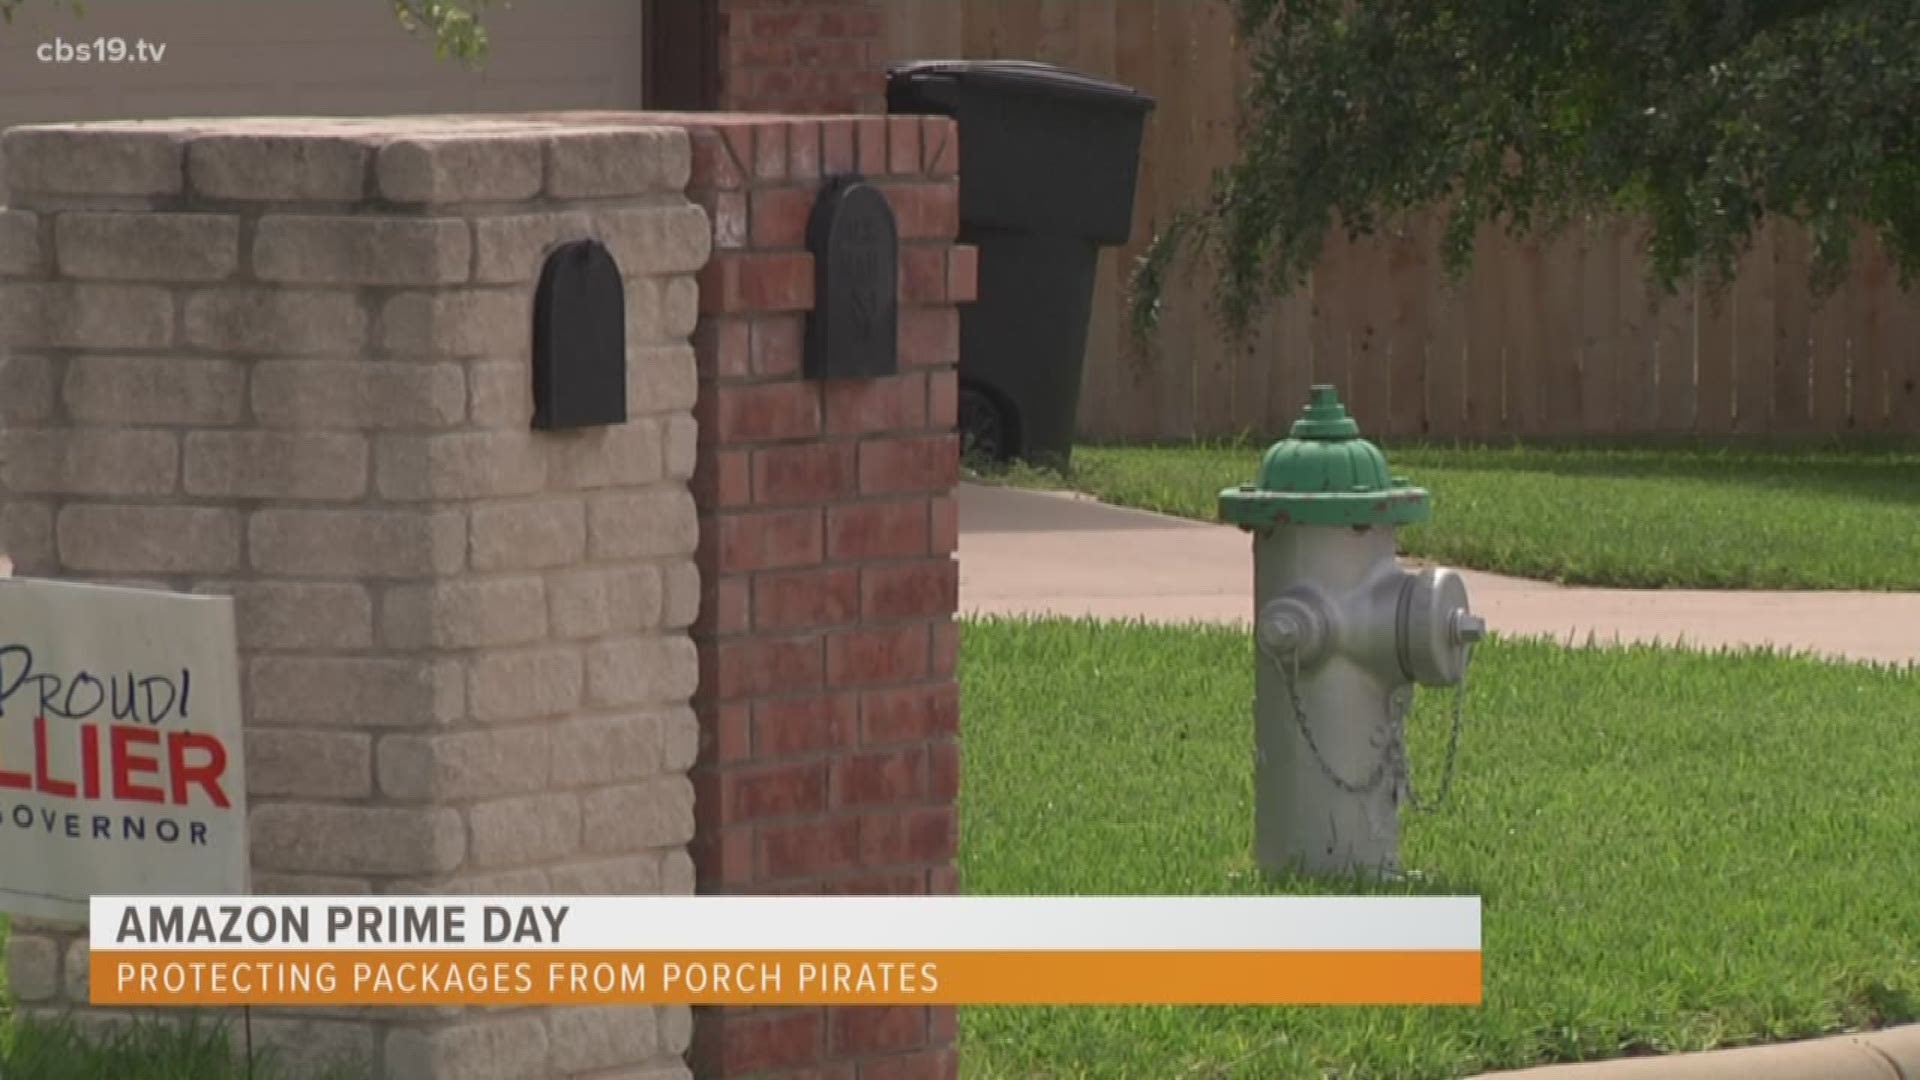 While you may be making the most of your 'Prime Day' deals. It's also good to remember it's a prime time for cyber thieves and porch pirates to strike.